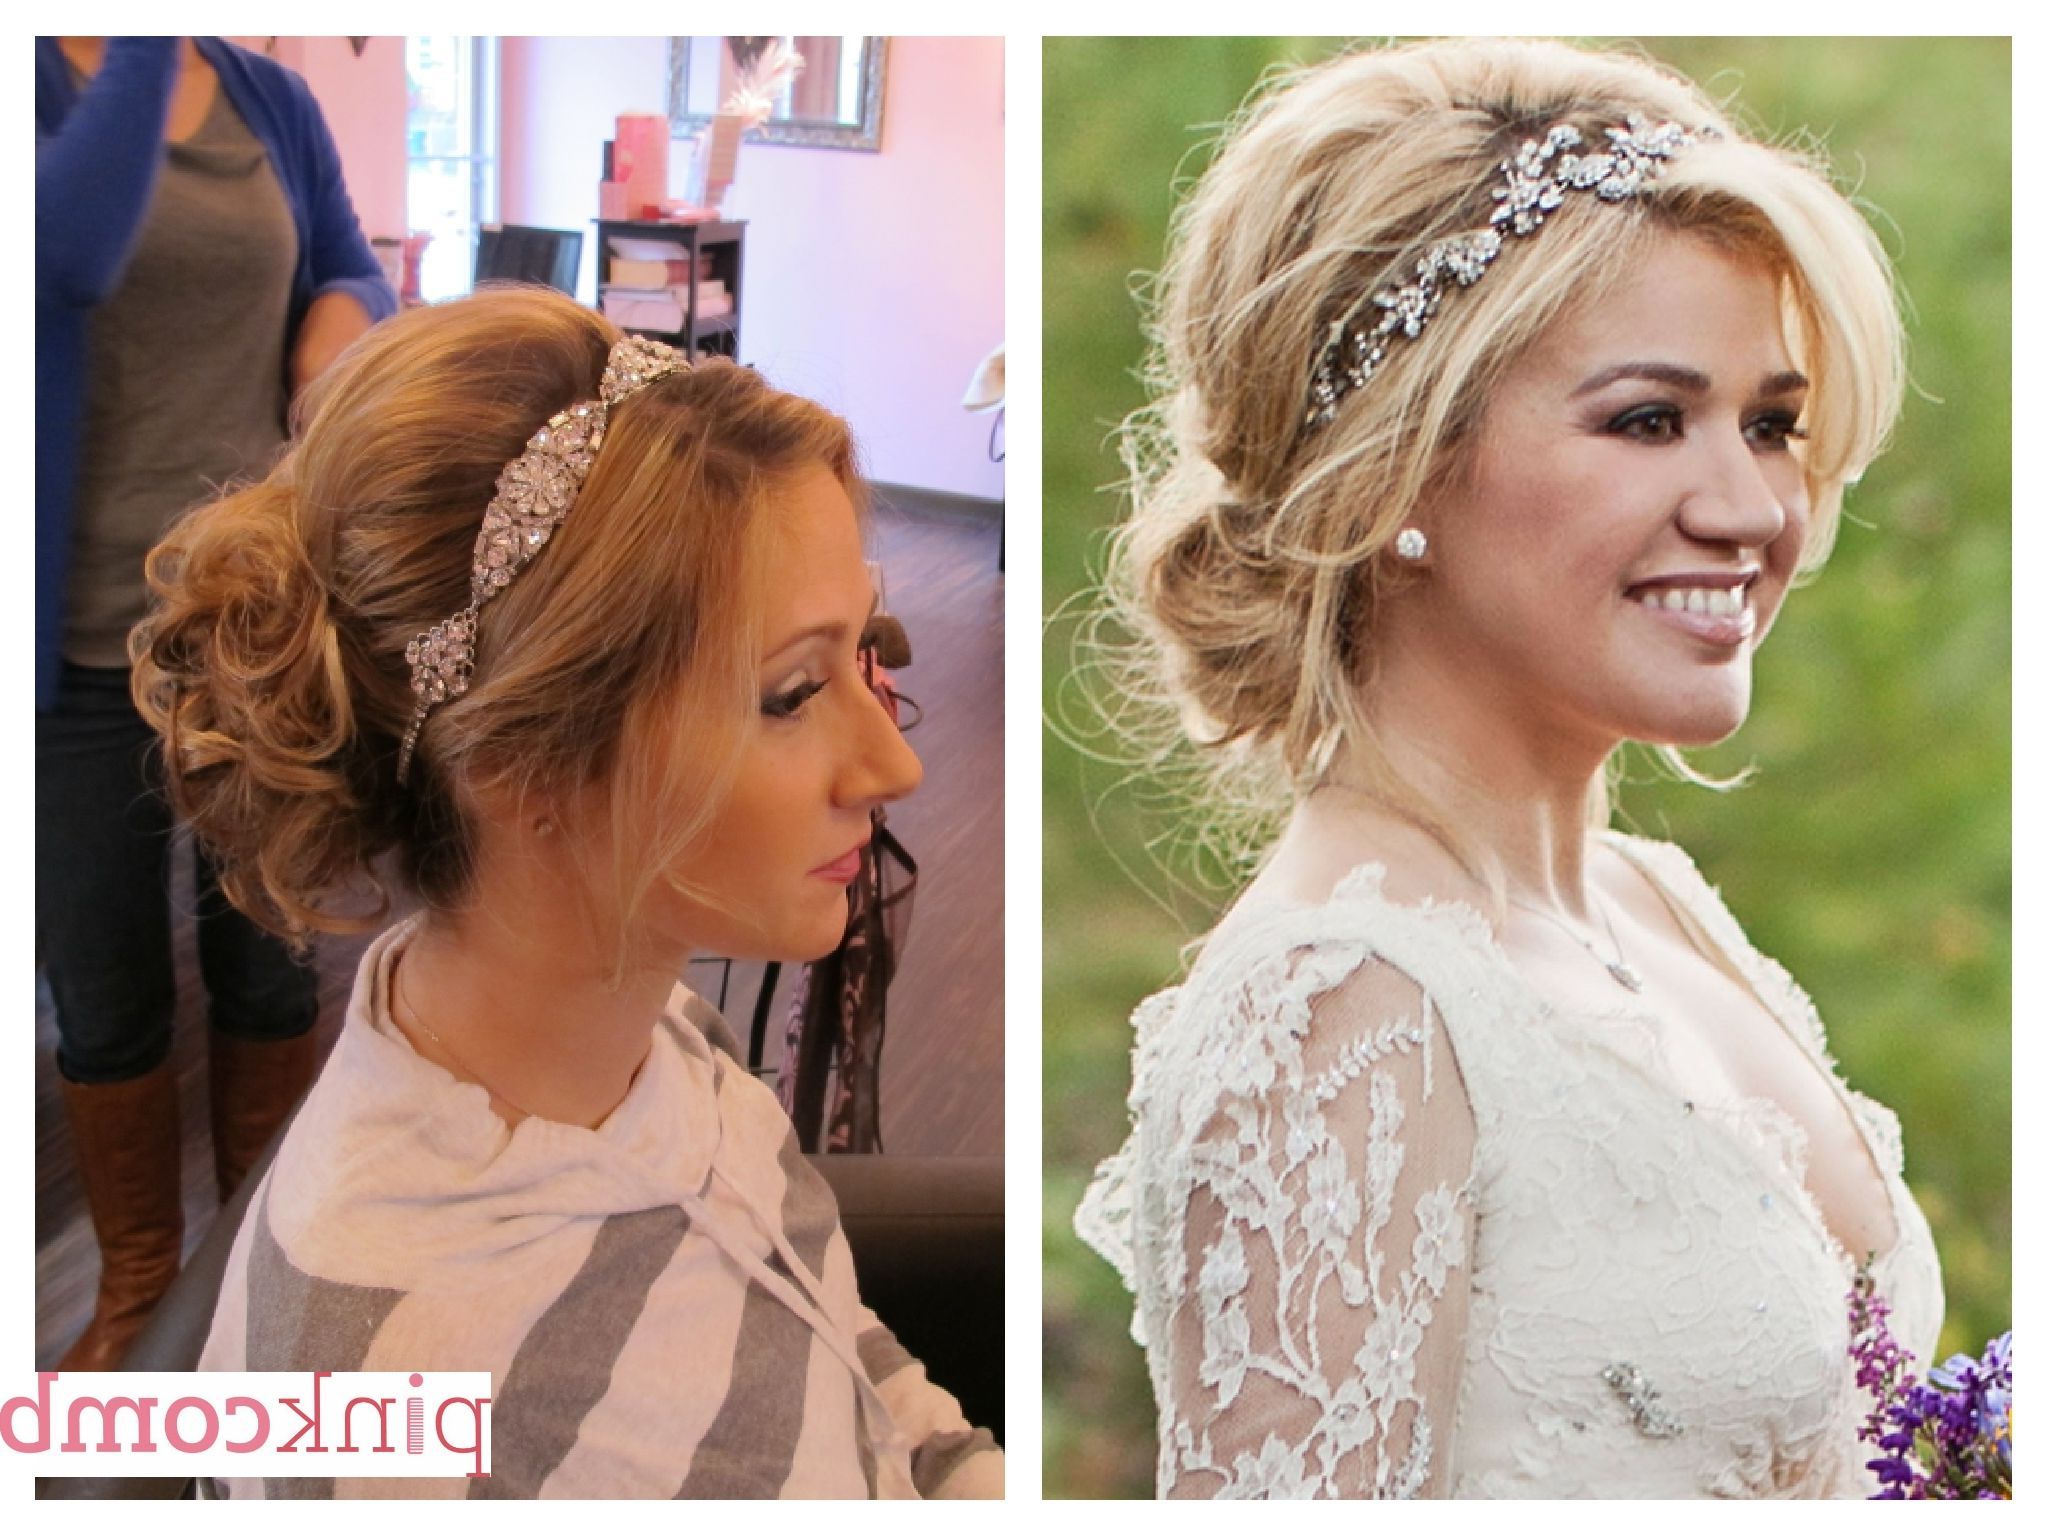 Kelly Clarkson Inspired Loose Blonde Updo With Curls Ad Headband Inside Most Recent Neat Bridal Hairdos With Headband (Gallery 20 of 20)